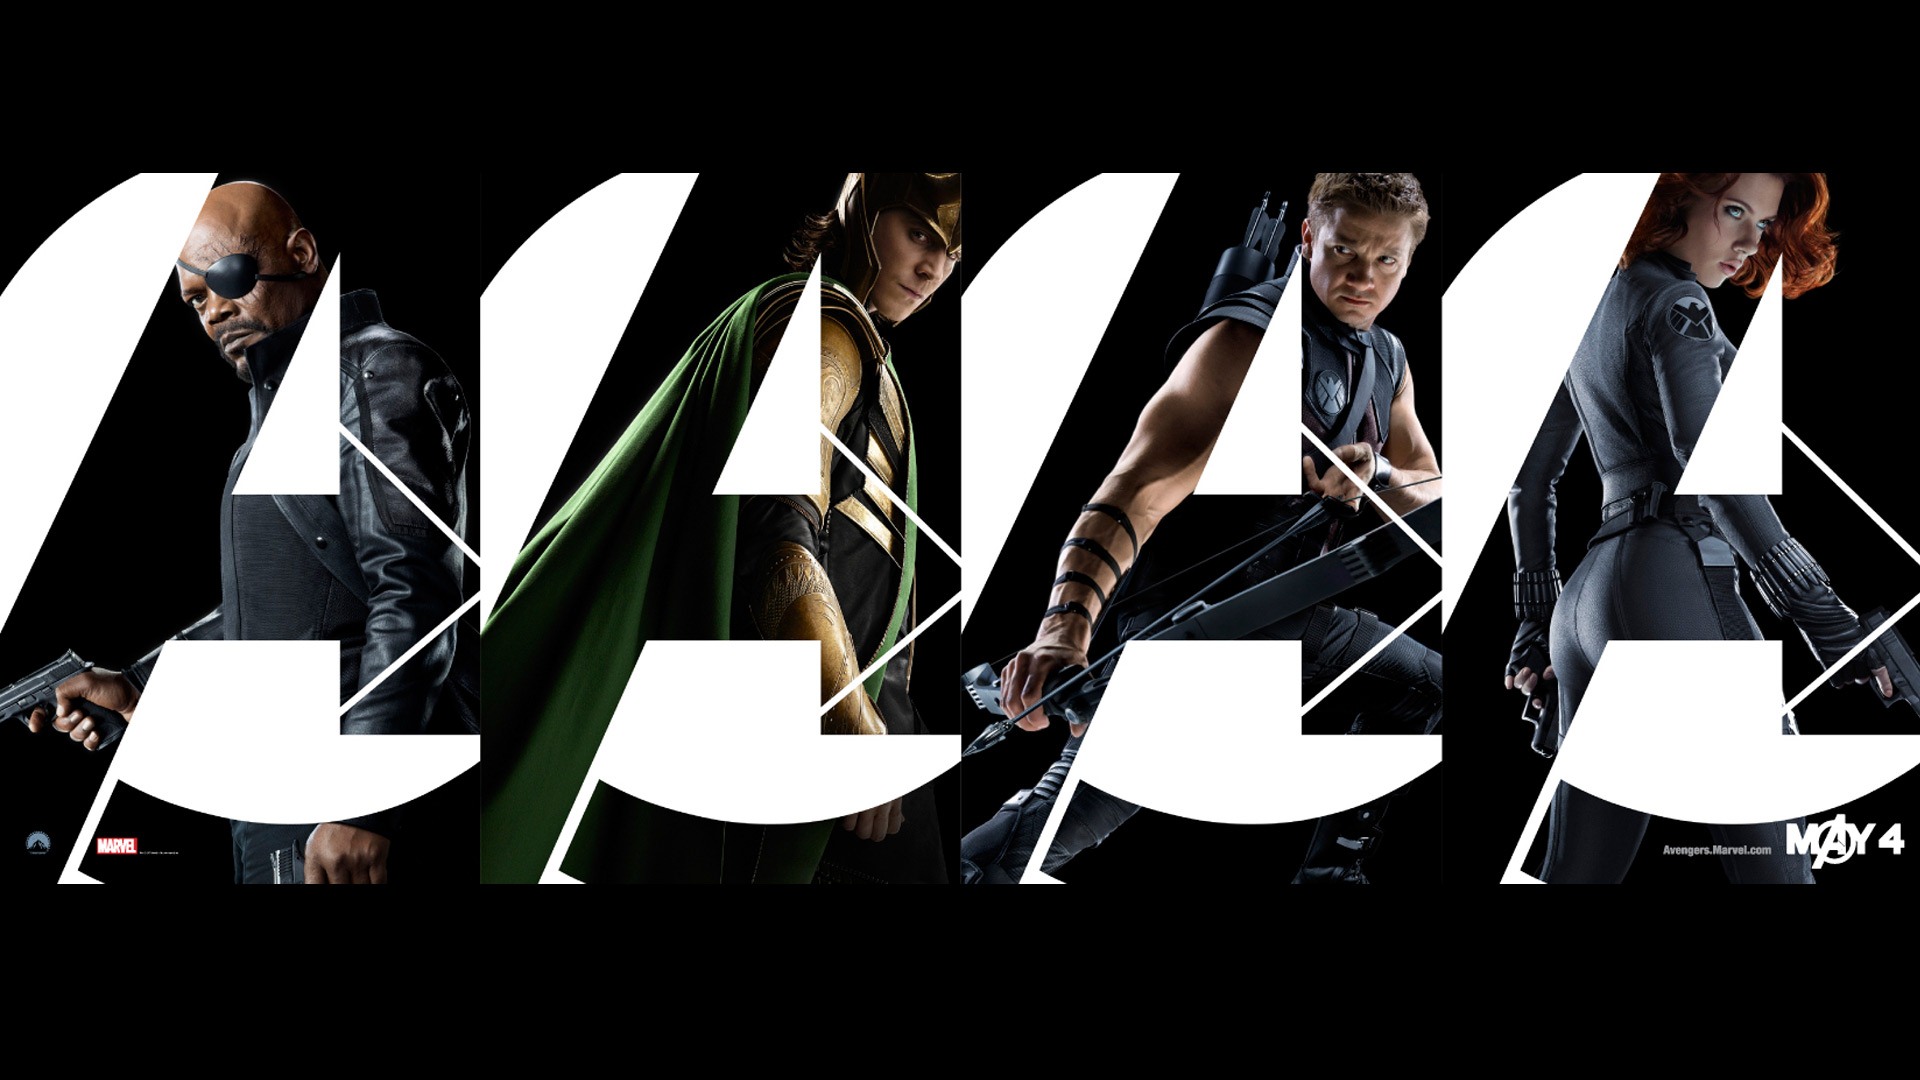 The Avengers 2012 HD wallpapers #10 - 1920x1080